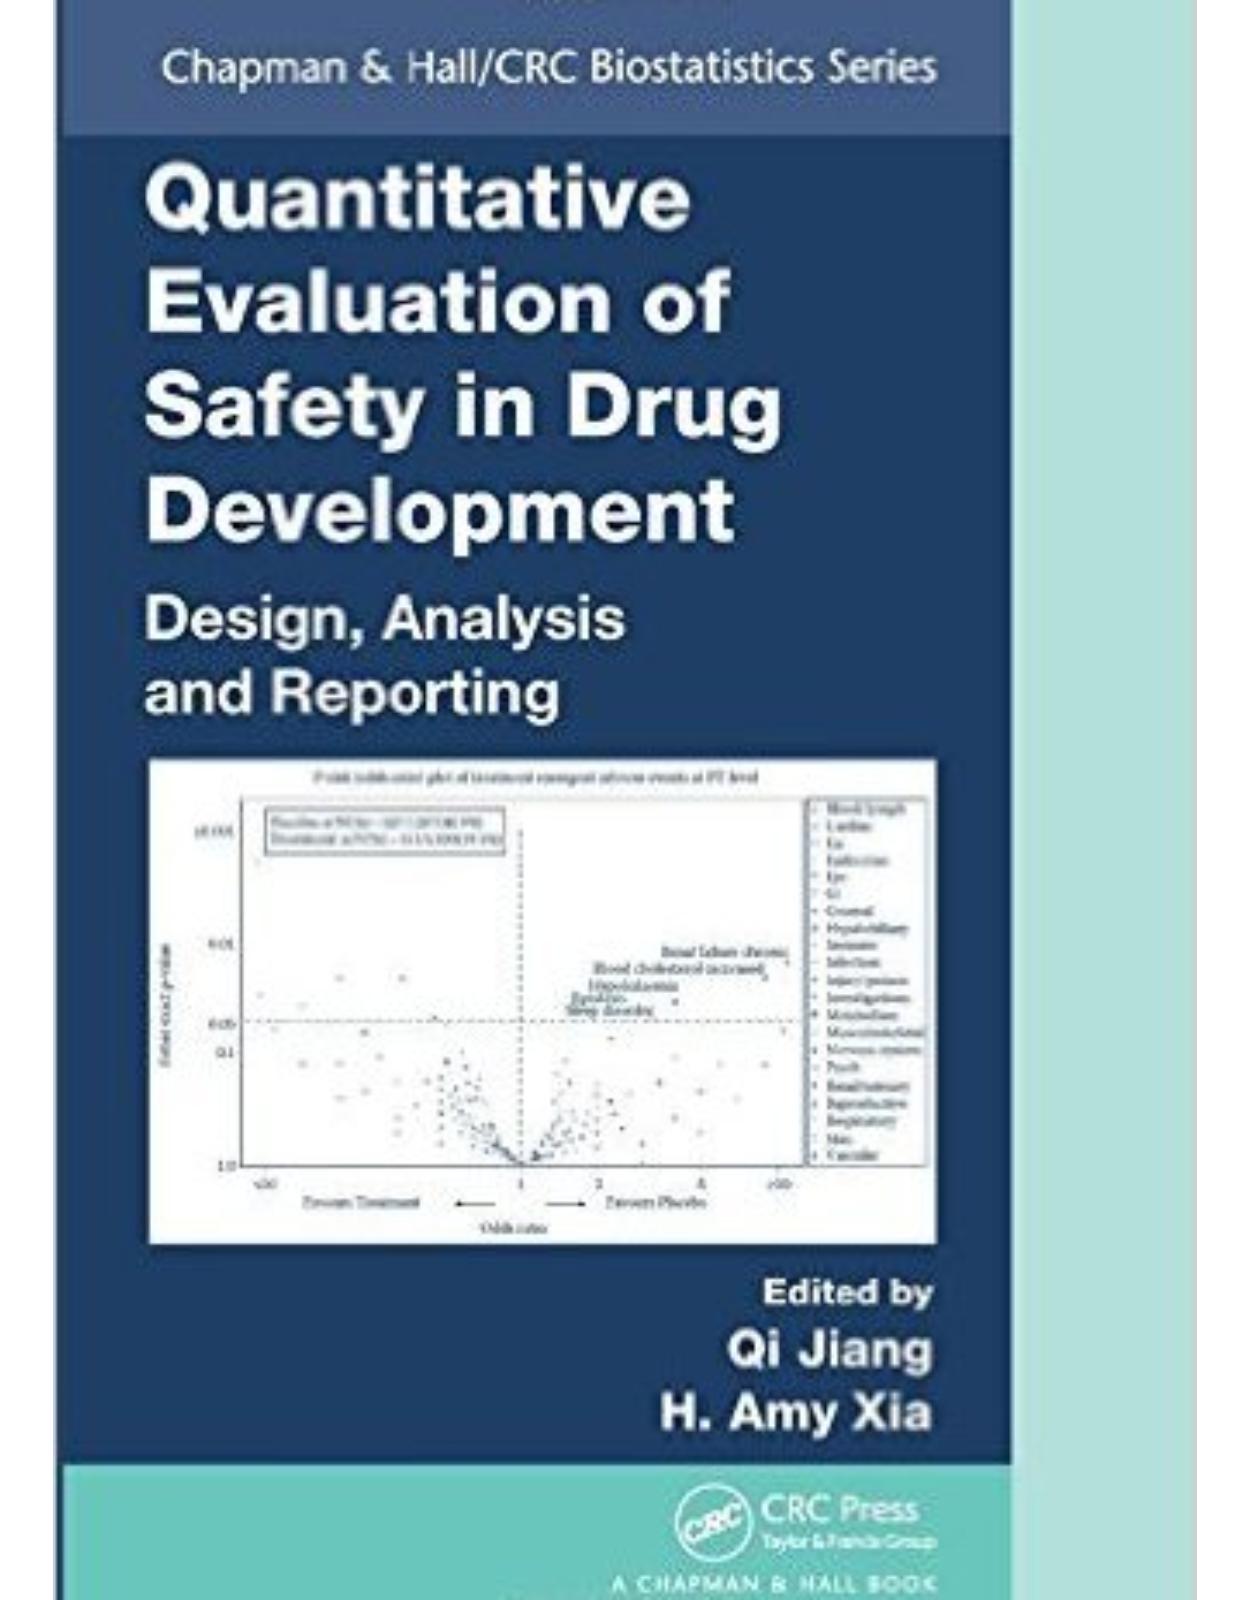 Quantitative Evaluation of Safety in Drug Development: Design, Analysis and Reporting (Chapman & Hall/CRC Biostatistics Series) 1st Edition